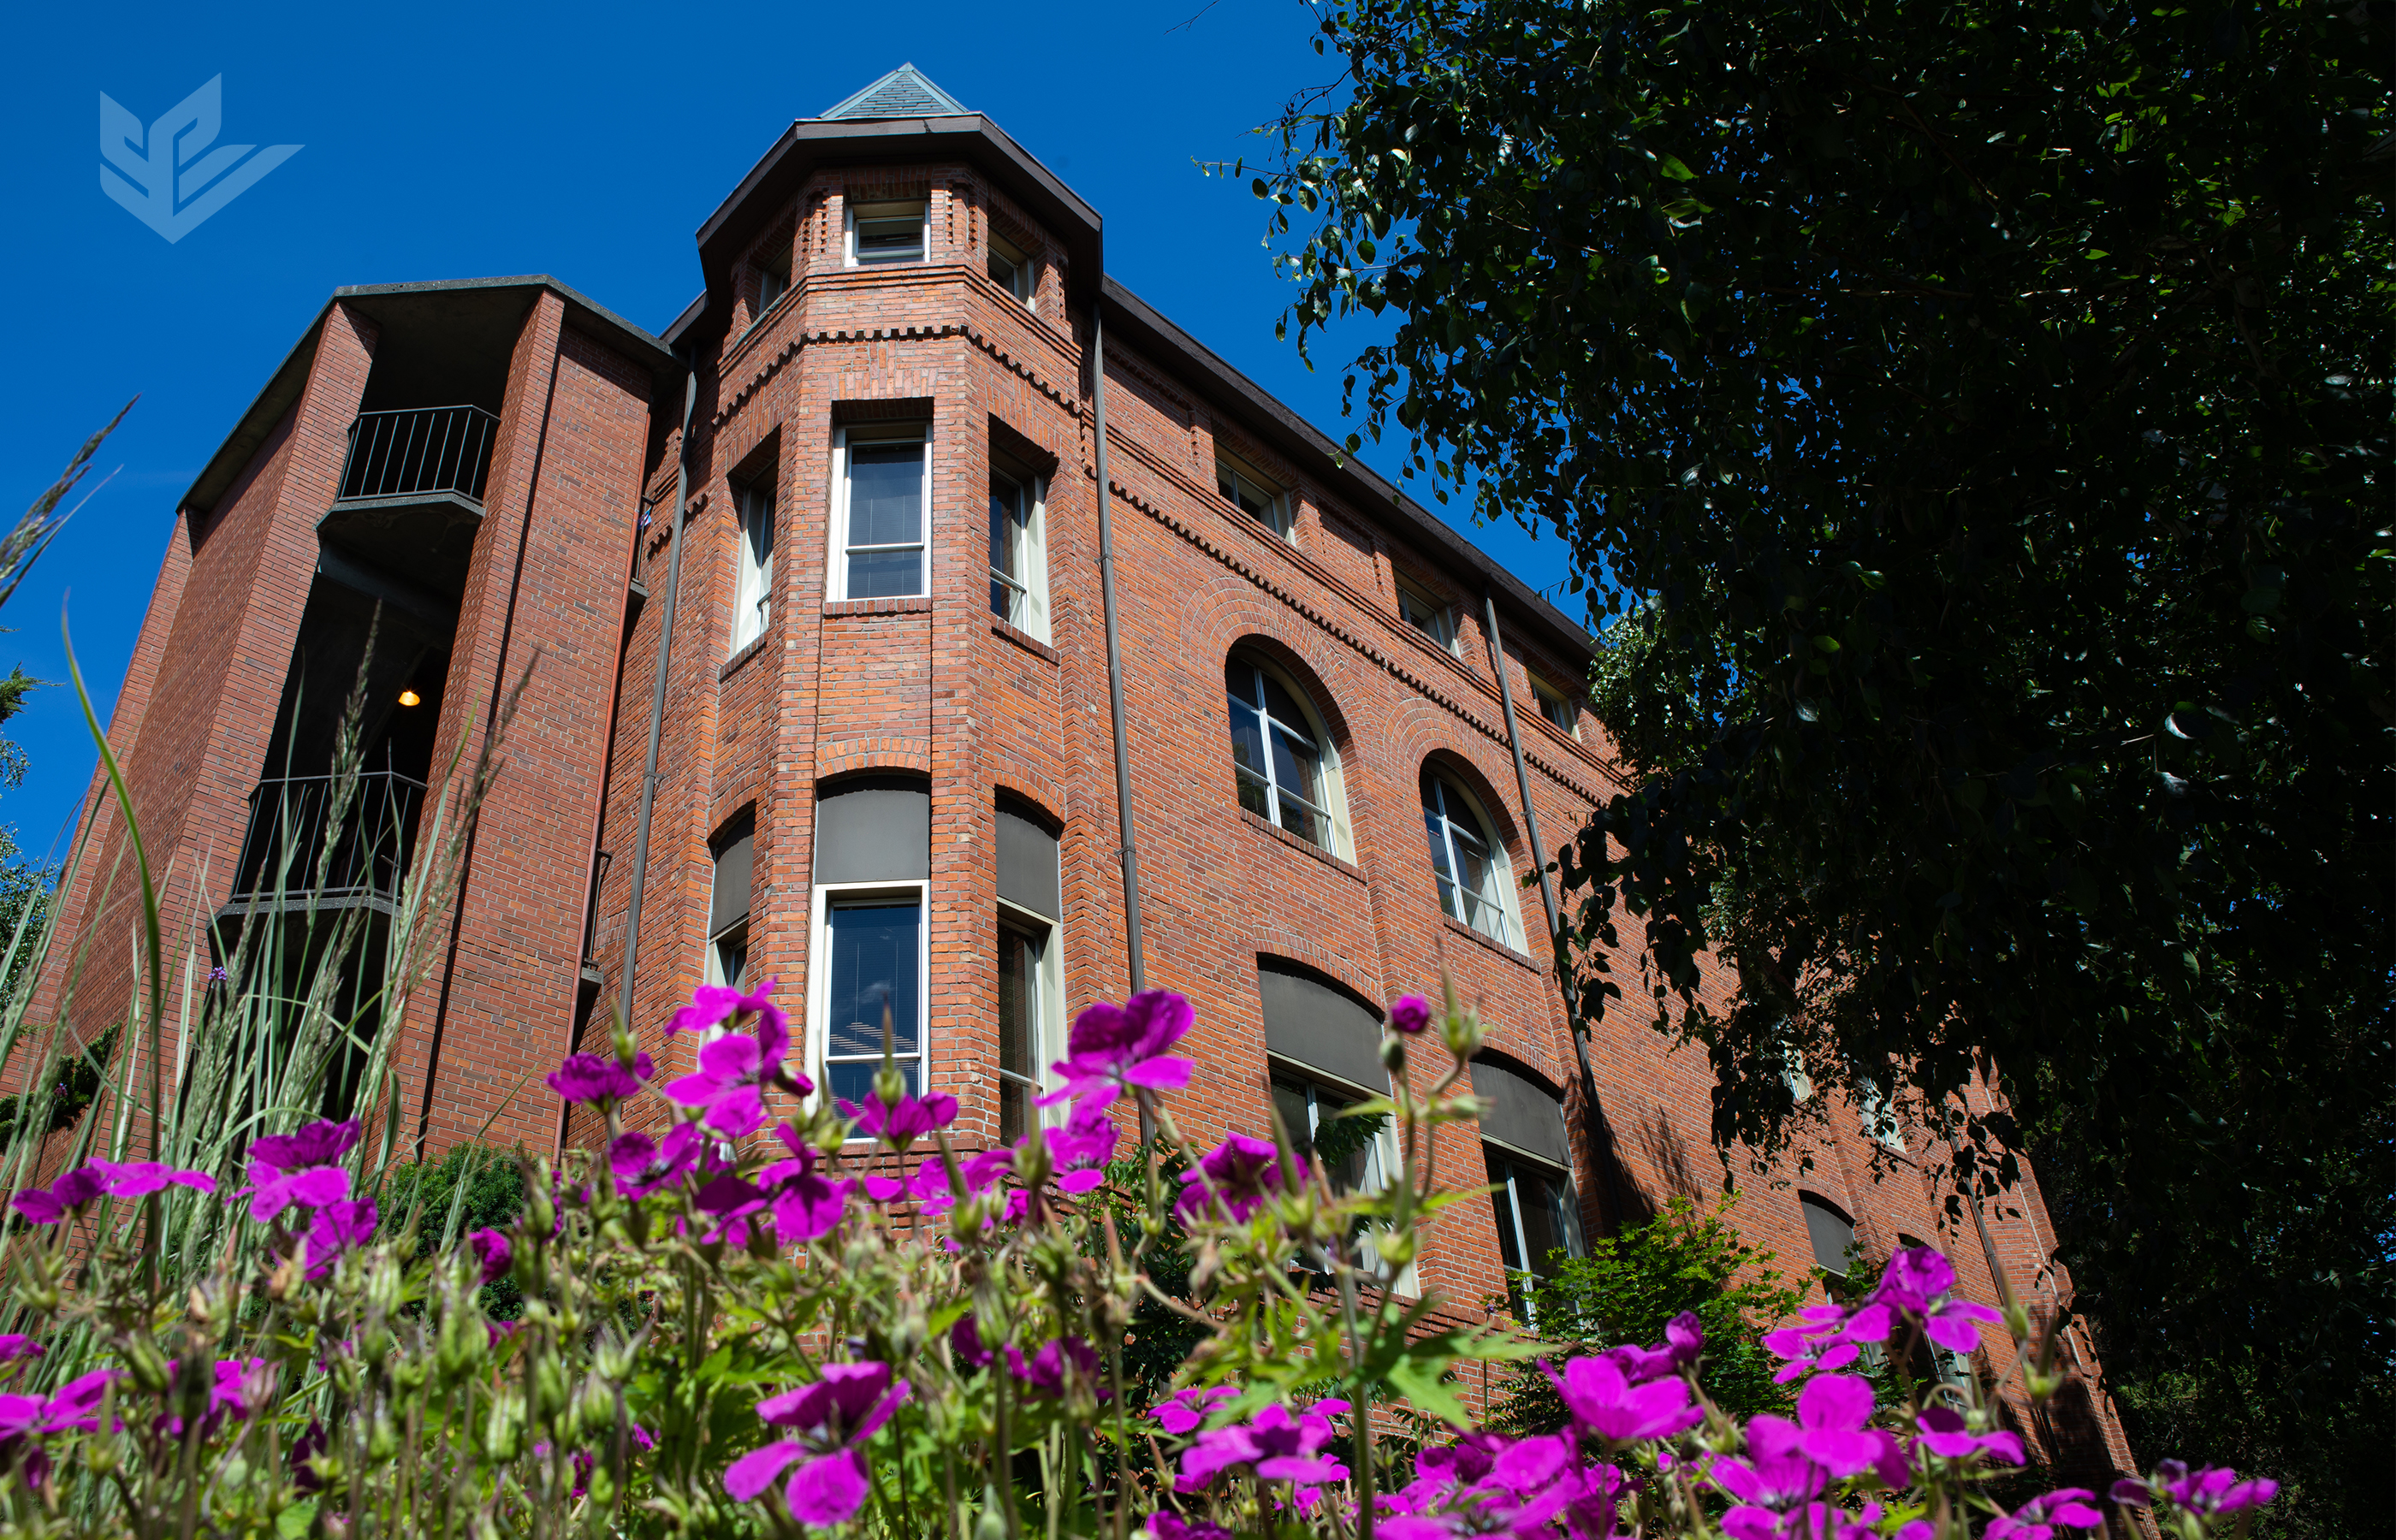 A summertime image of historic Alexander and Adelaide Hall on the Seattle Pacific University campus.